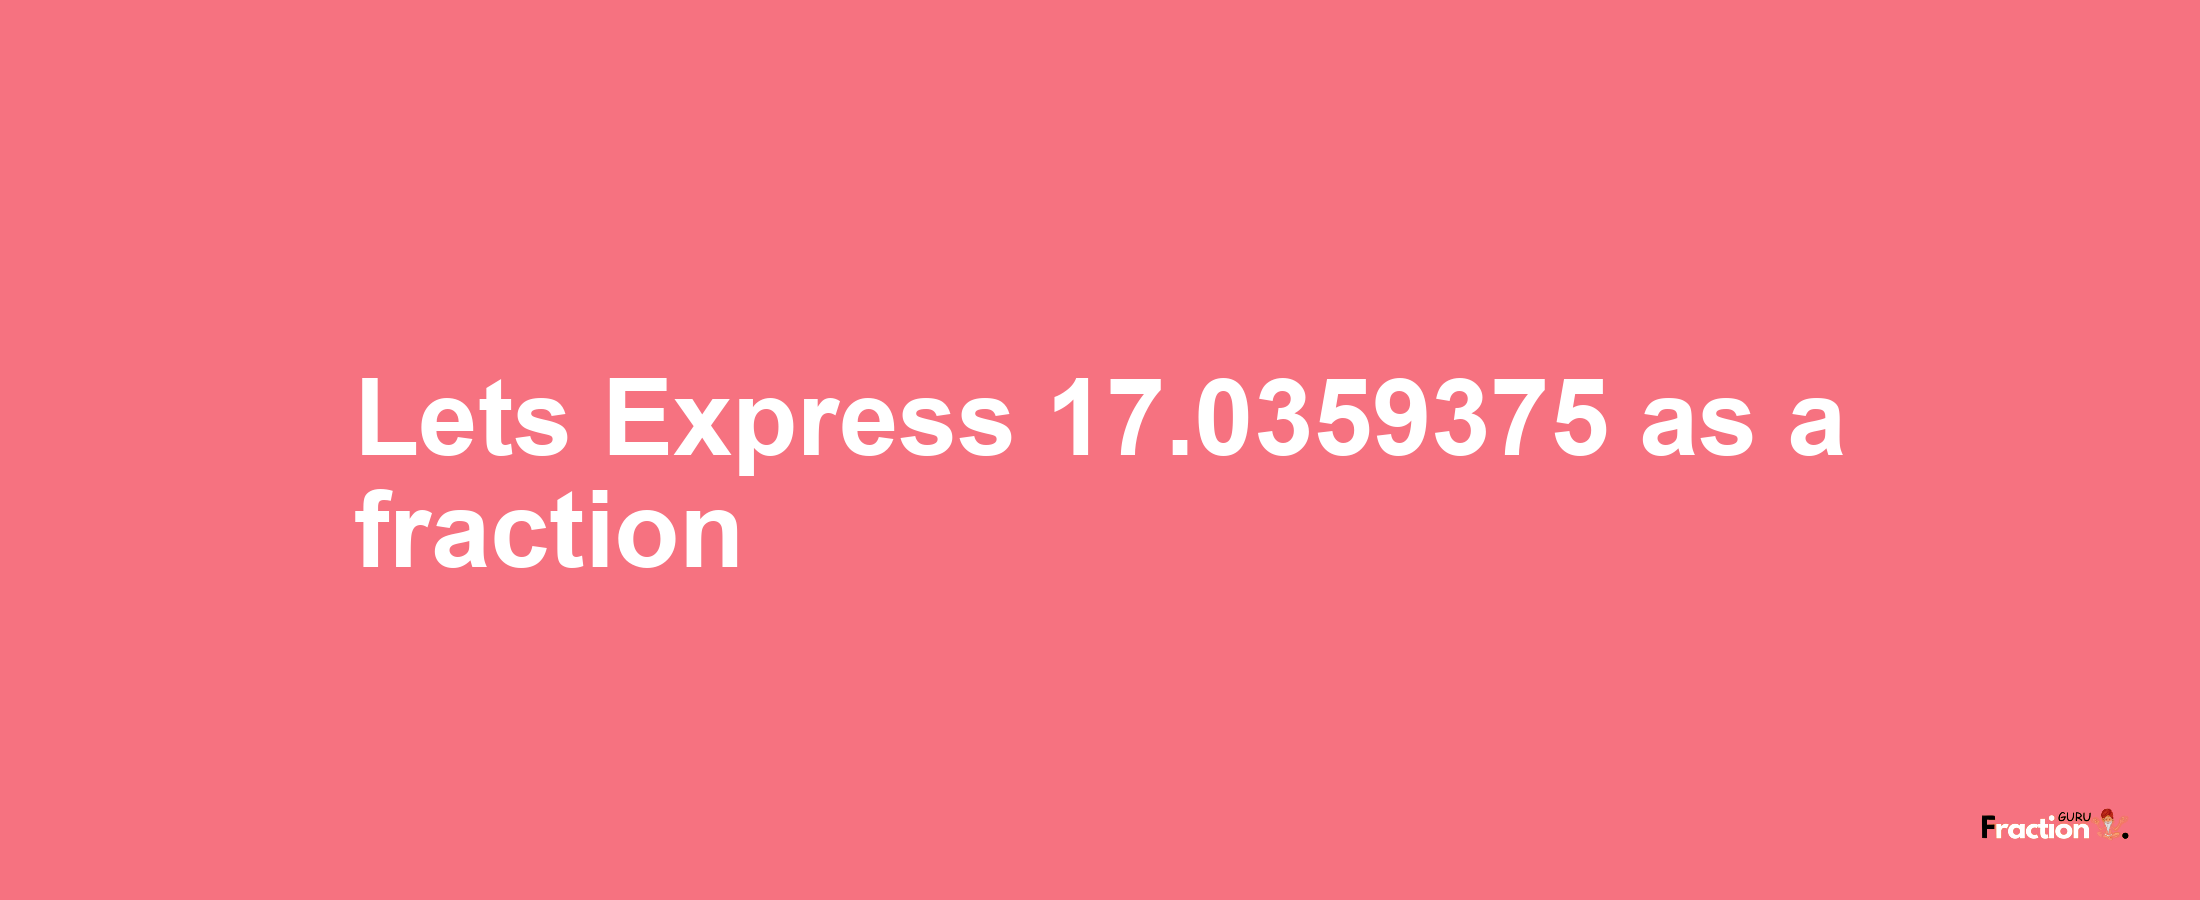 Lets Express 17.0359375 as afraction